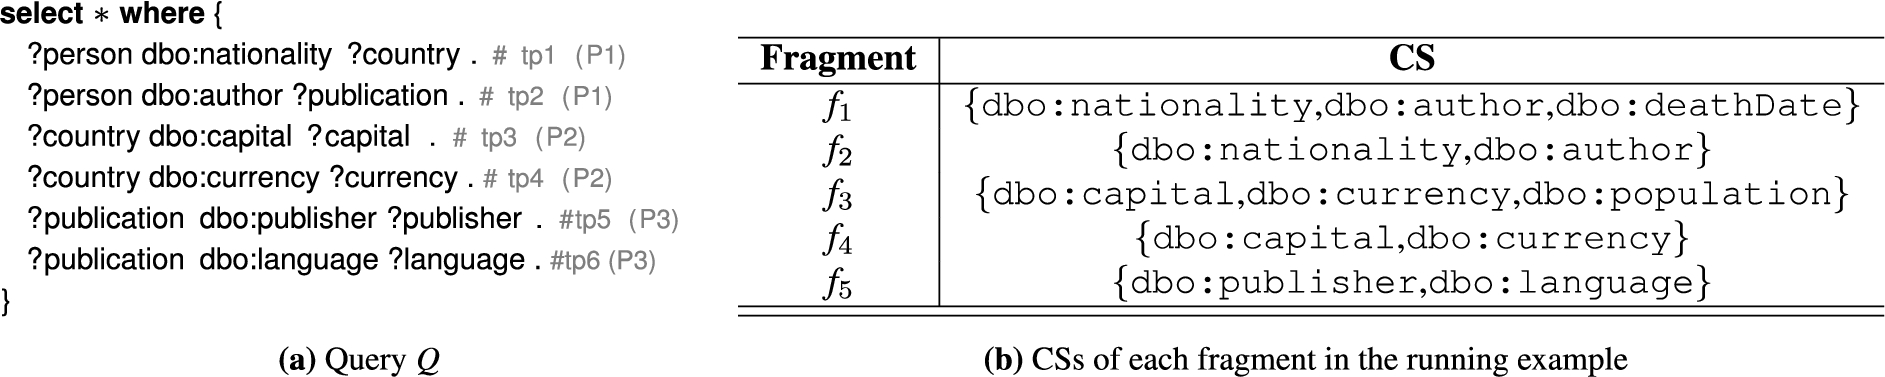 (a) Example SPARQL query Q and (b) corresponding characteristic sets in the example network.